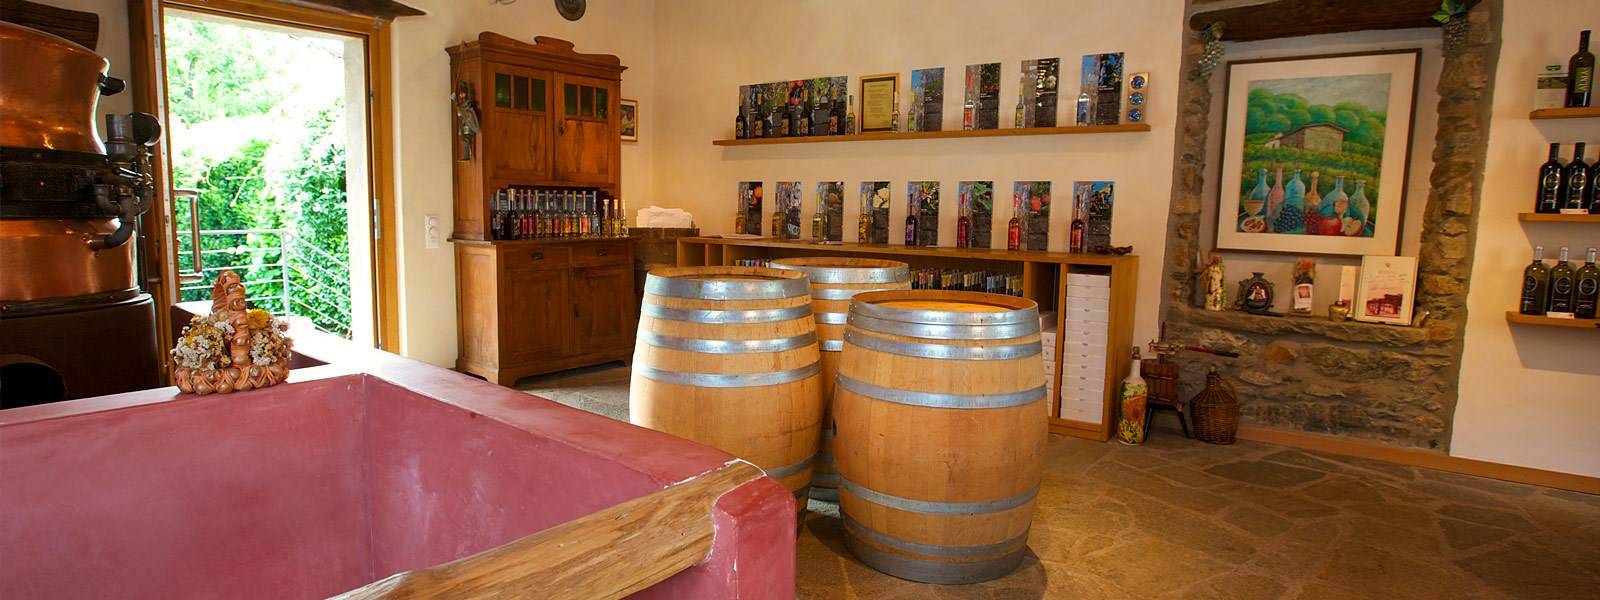 Weingut Cantine Ronco